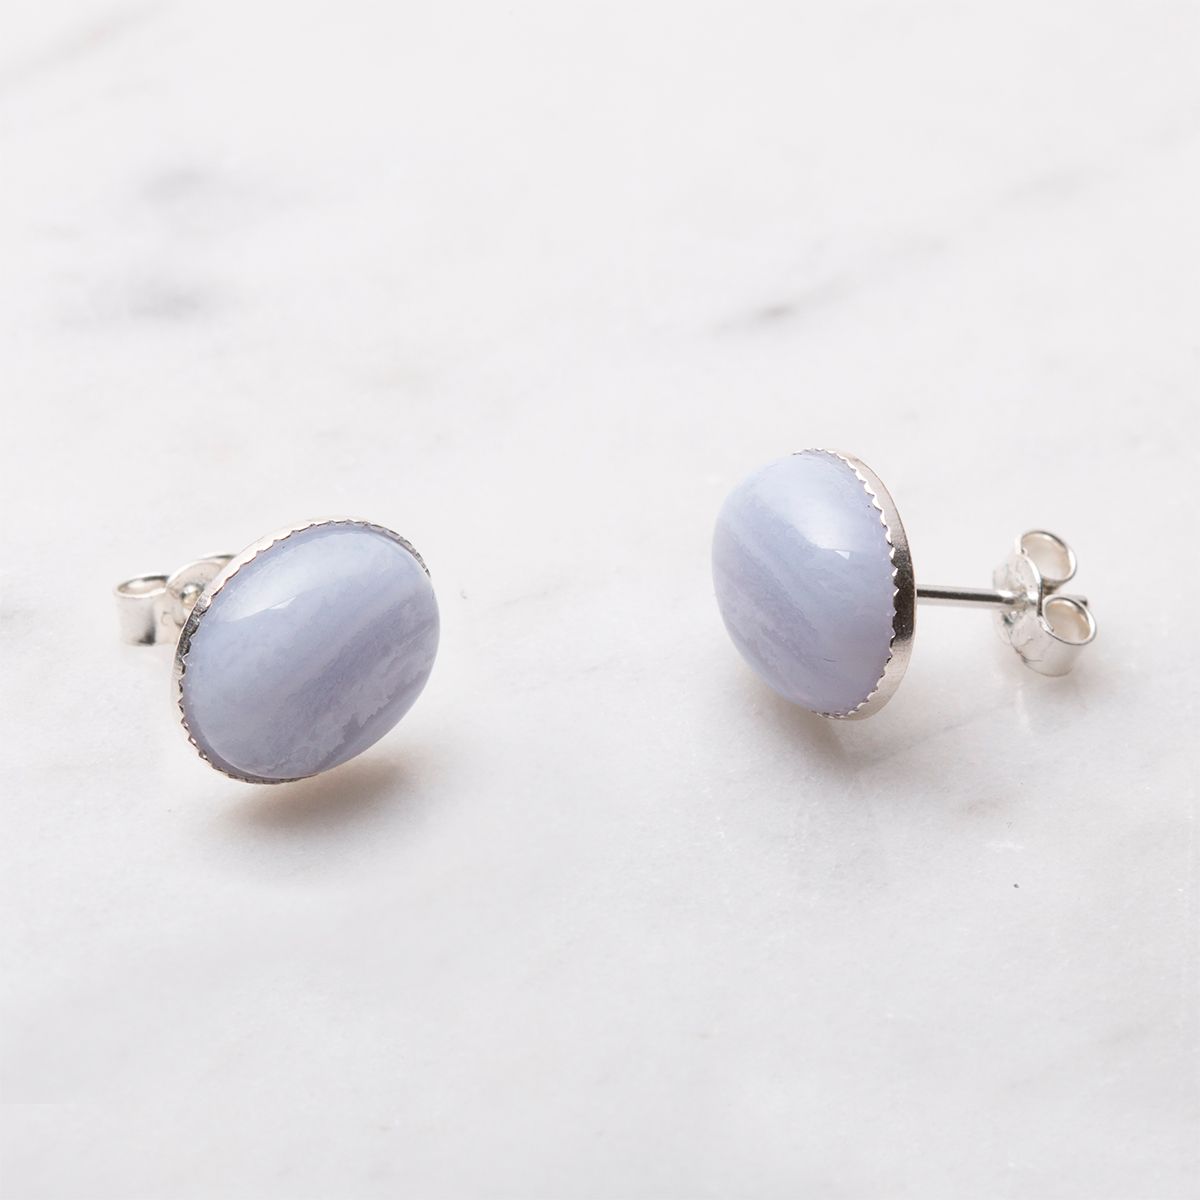 Blue Lace Agate Earstuds